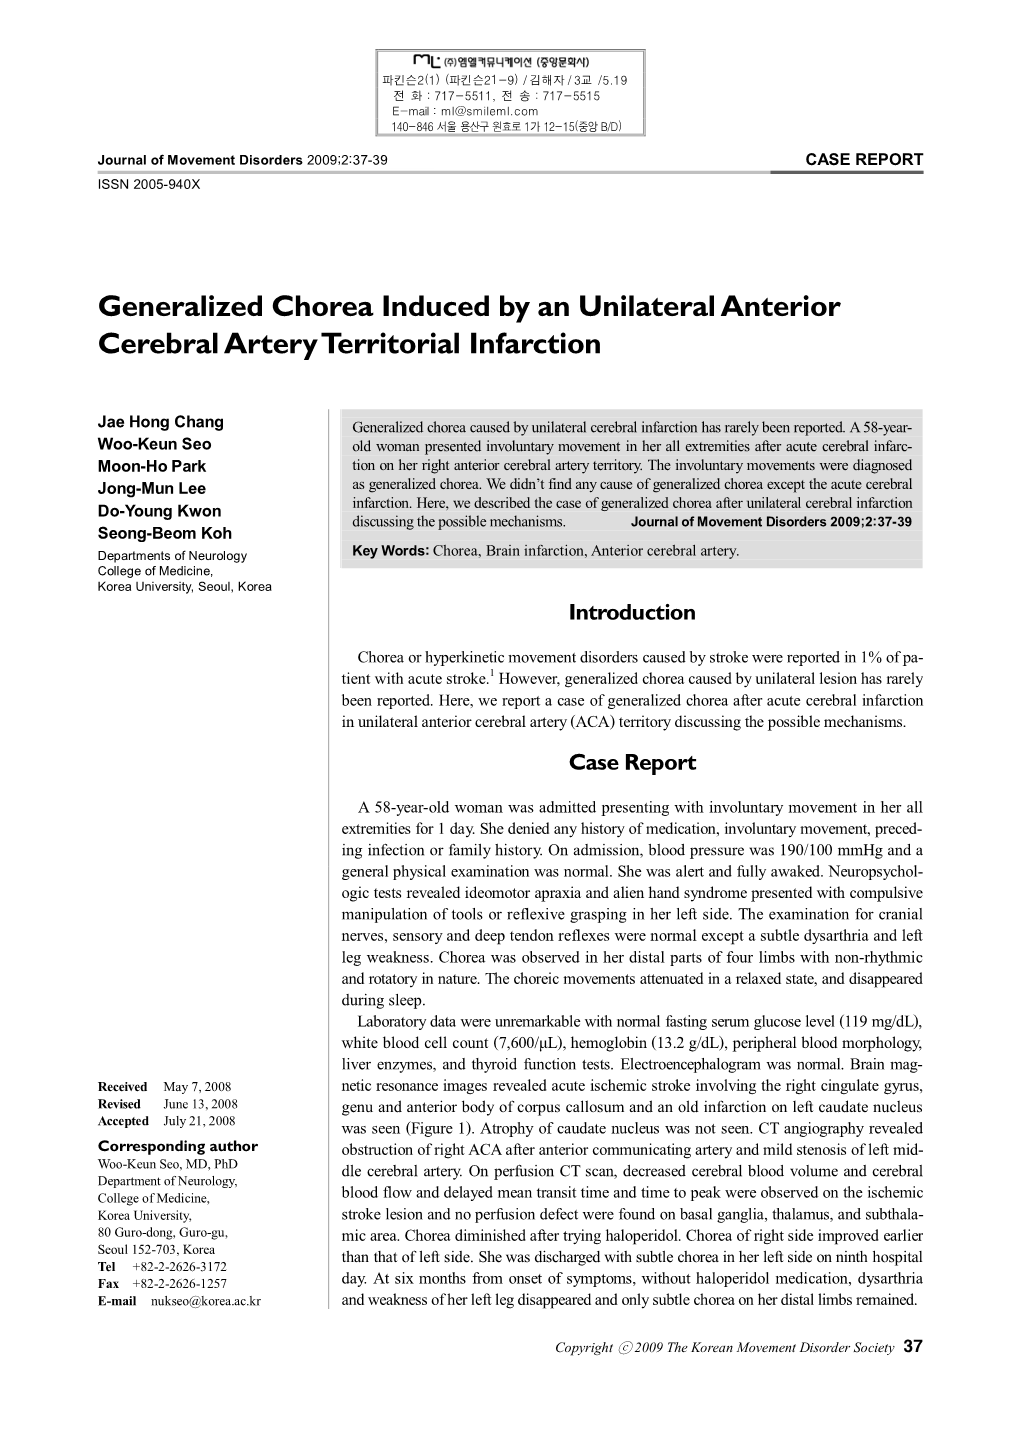 Generalized Chorea Induced by an Unilateral Anterior Cerebral Artery Territorial Infarction